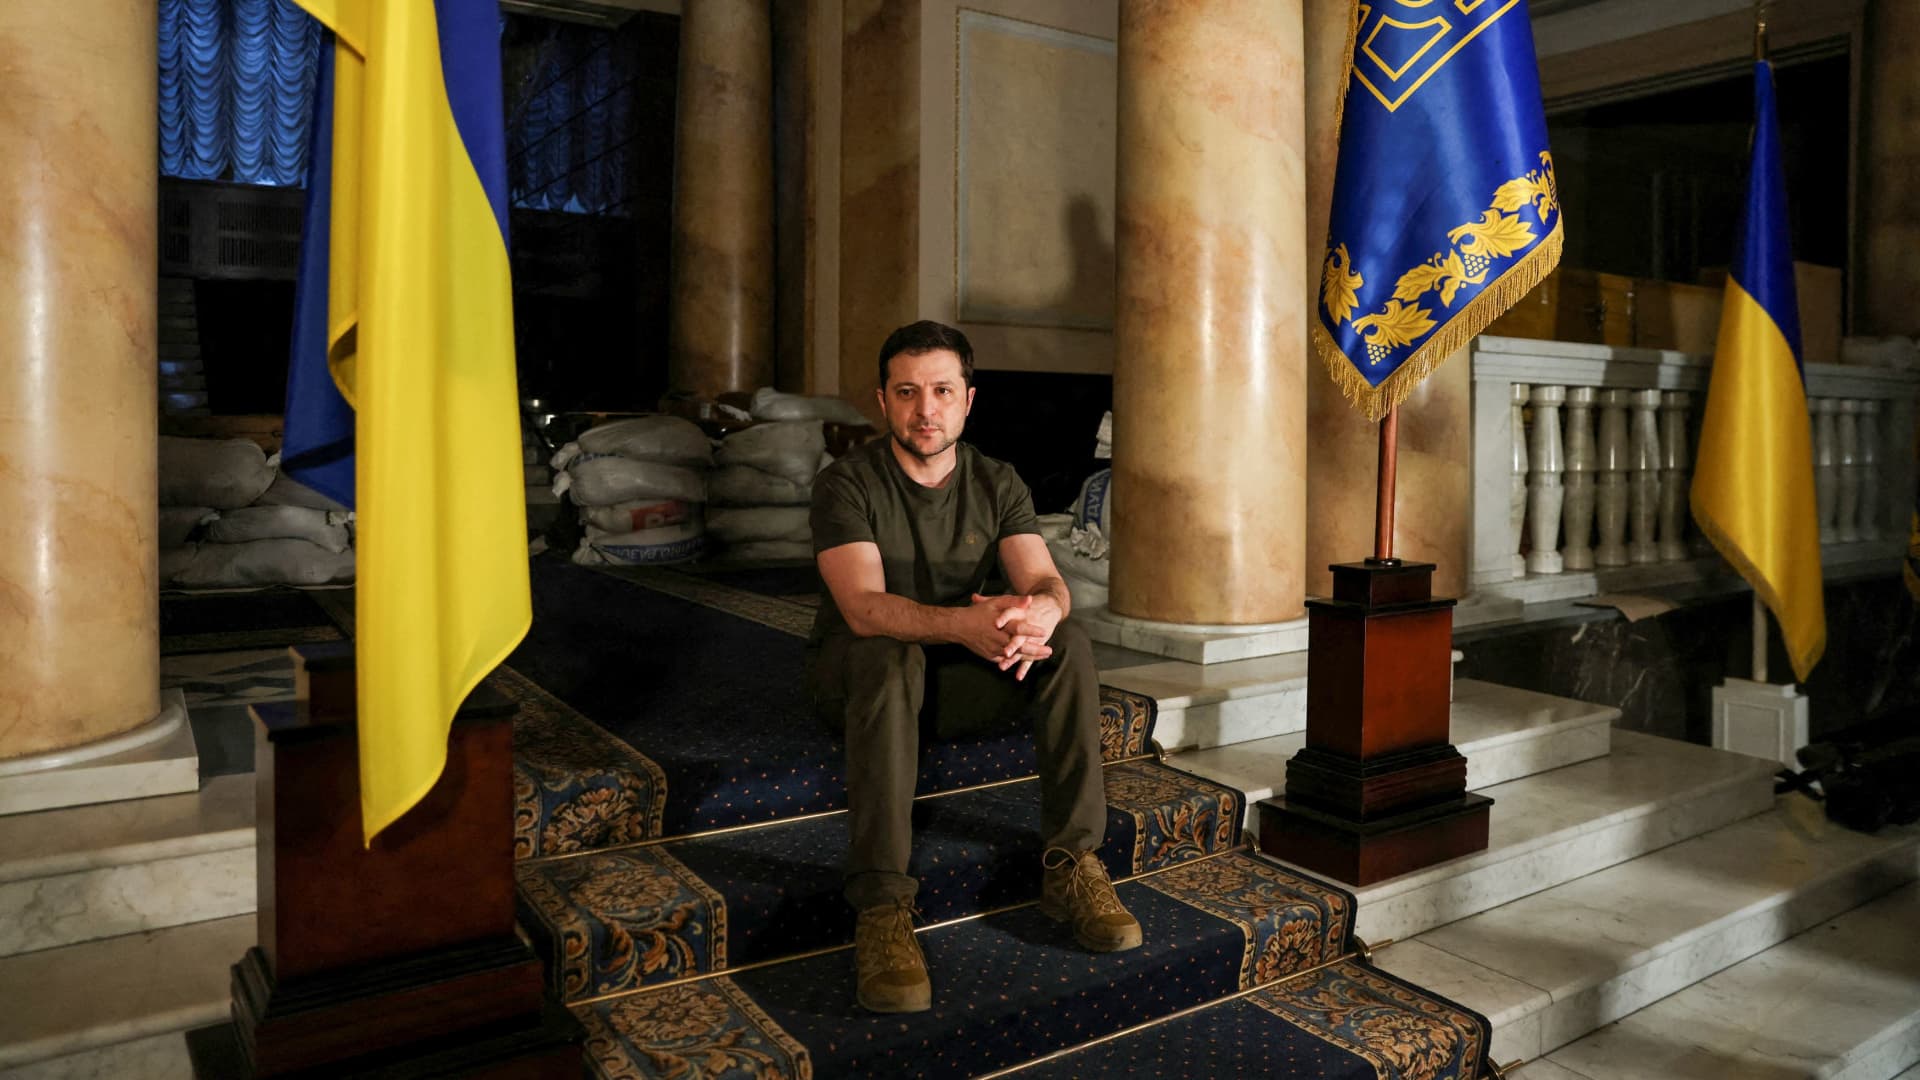 Ukrainian President Volodymyr Zelenskiy poses after an interview with Reuters in Kyiv, Ukraine, March 1, 2022.